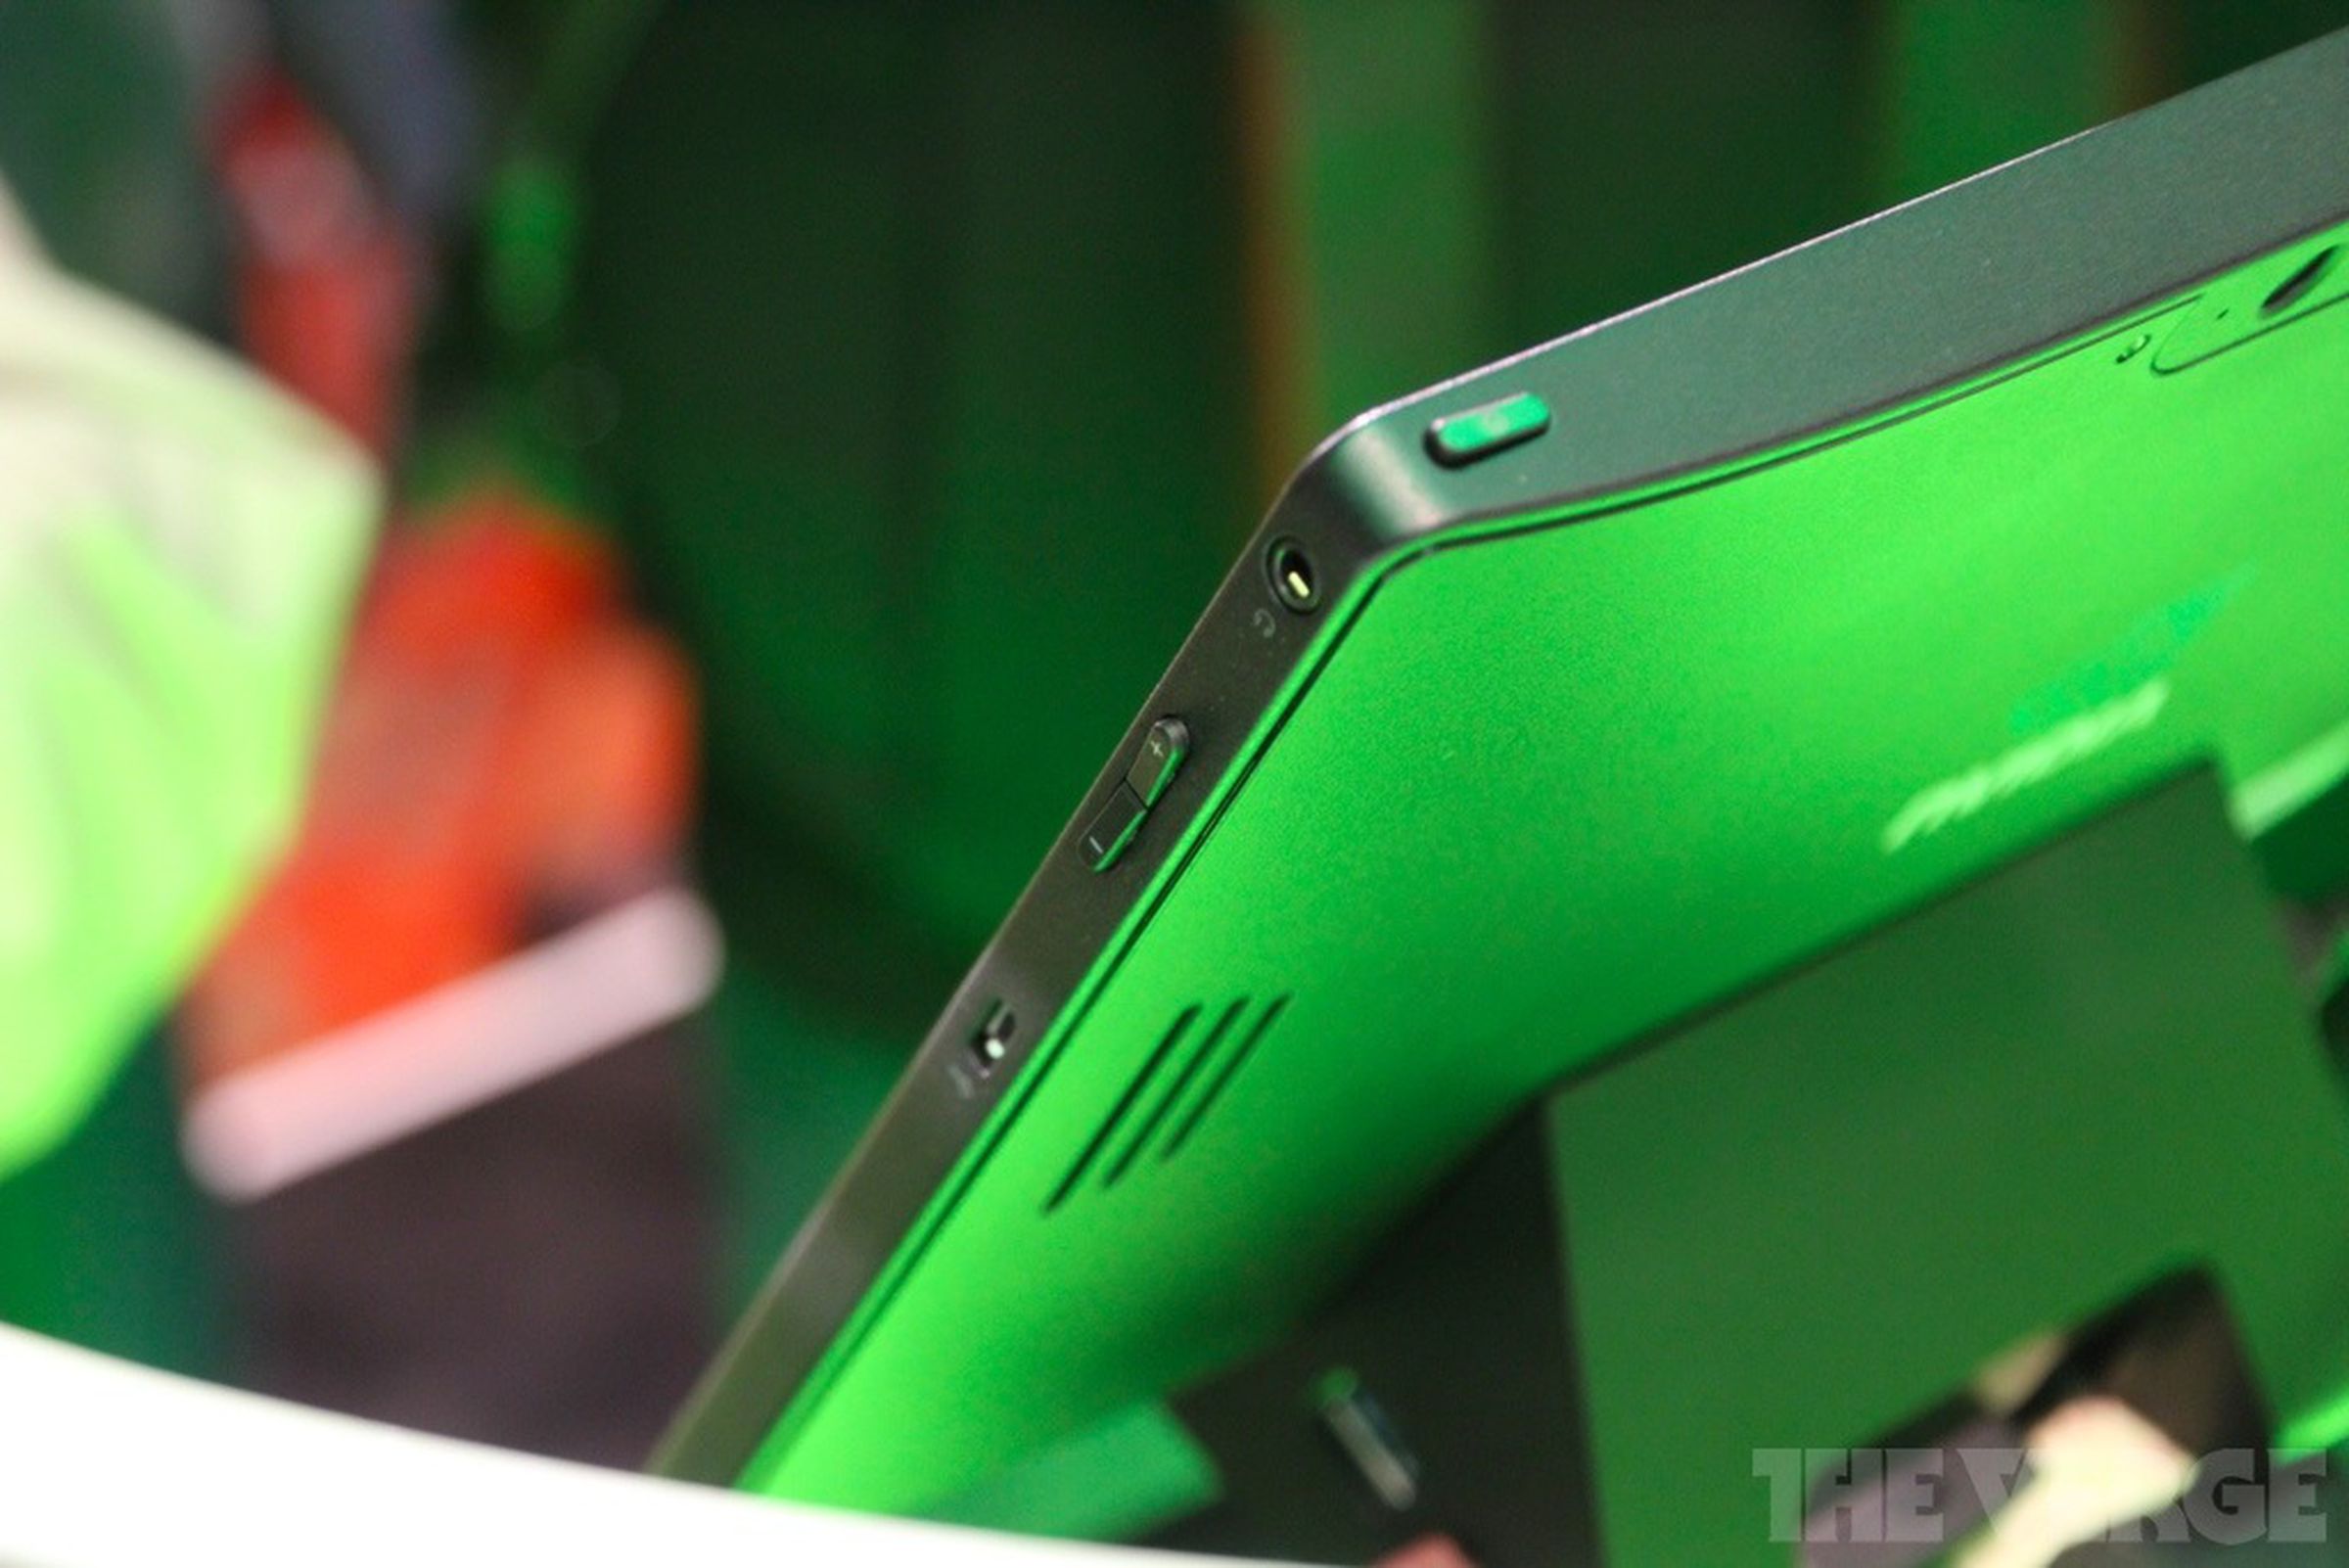 Nvidia's Tegra 3 Windows 8 reference tablet pictures